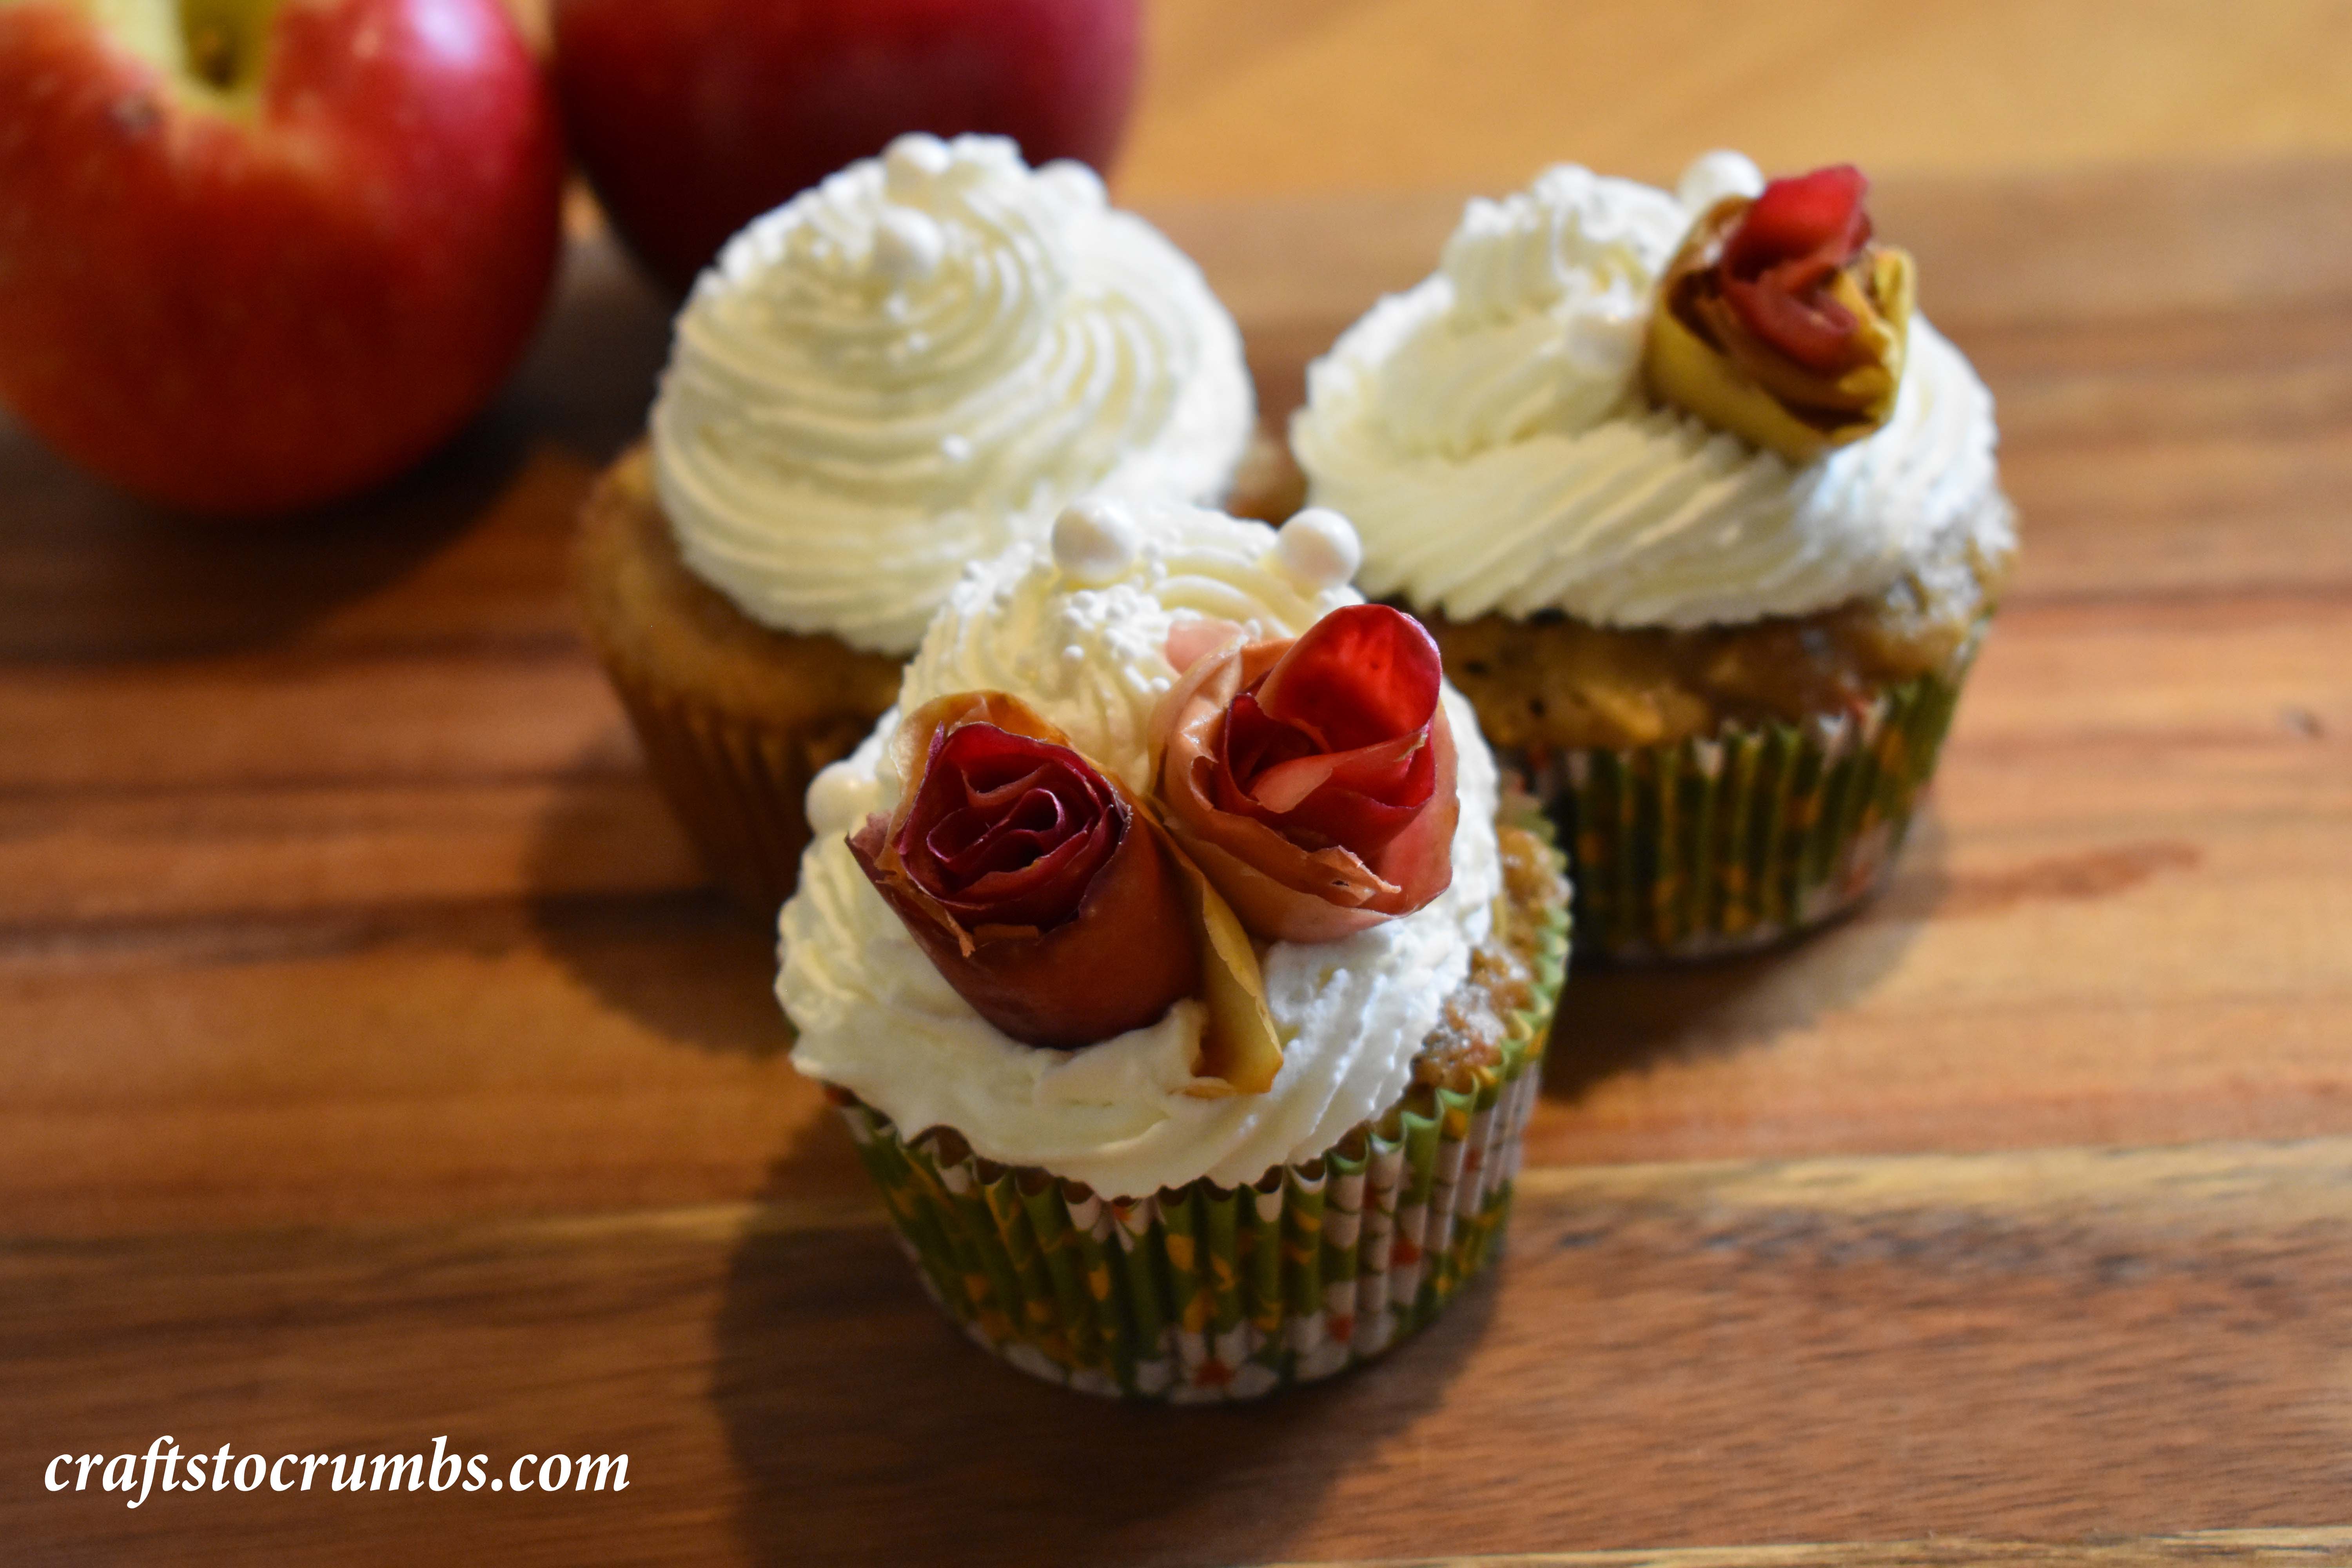 Crafts to Crumbs Apple Cupcakes